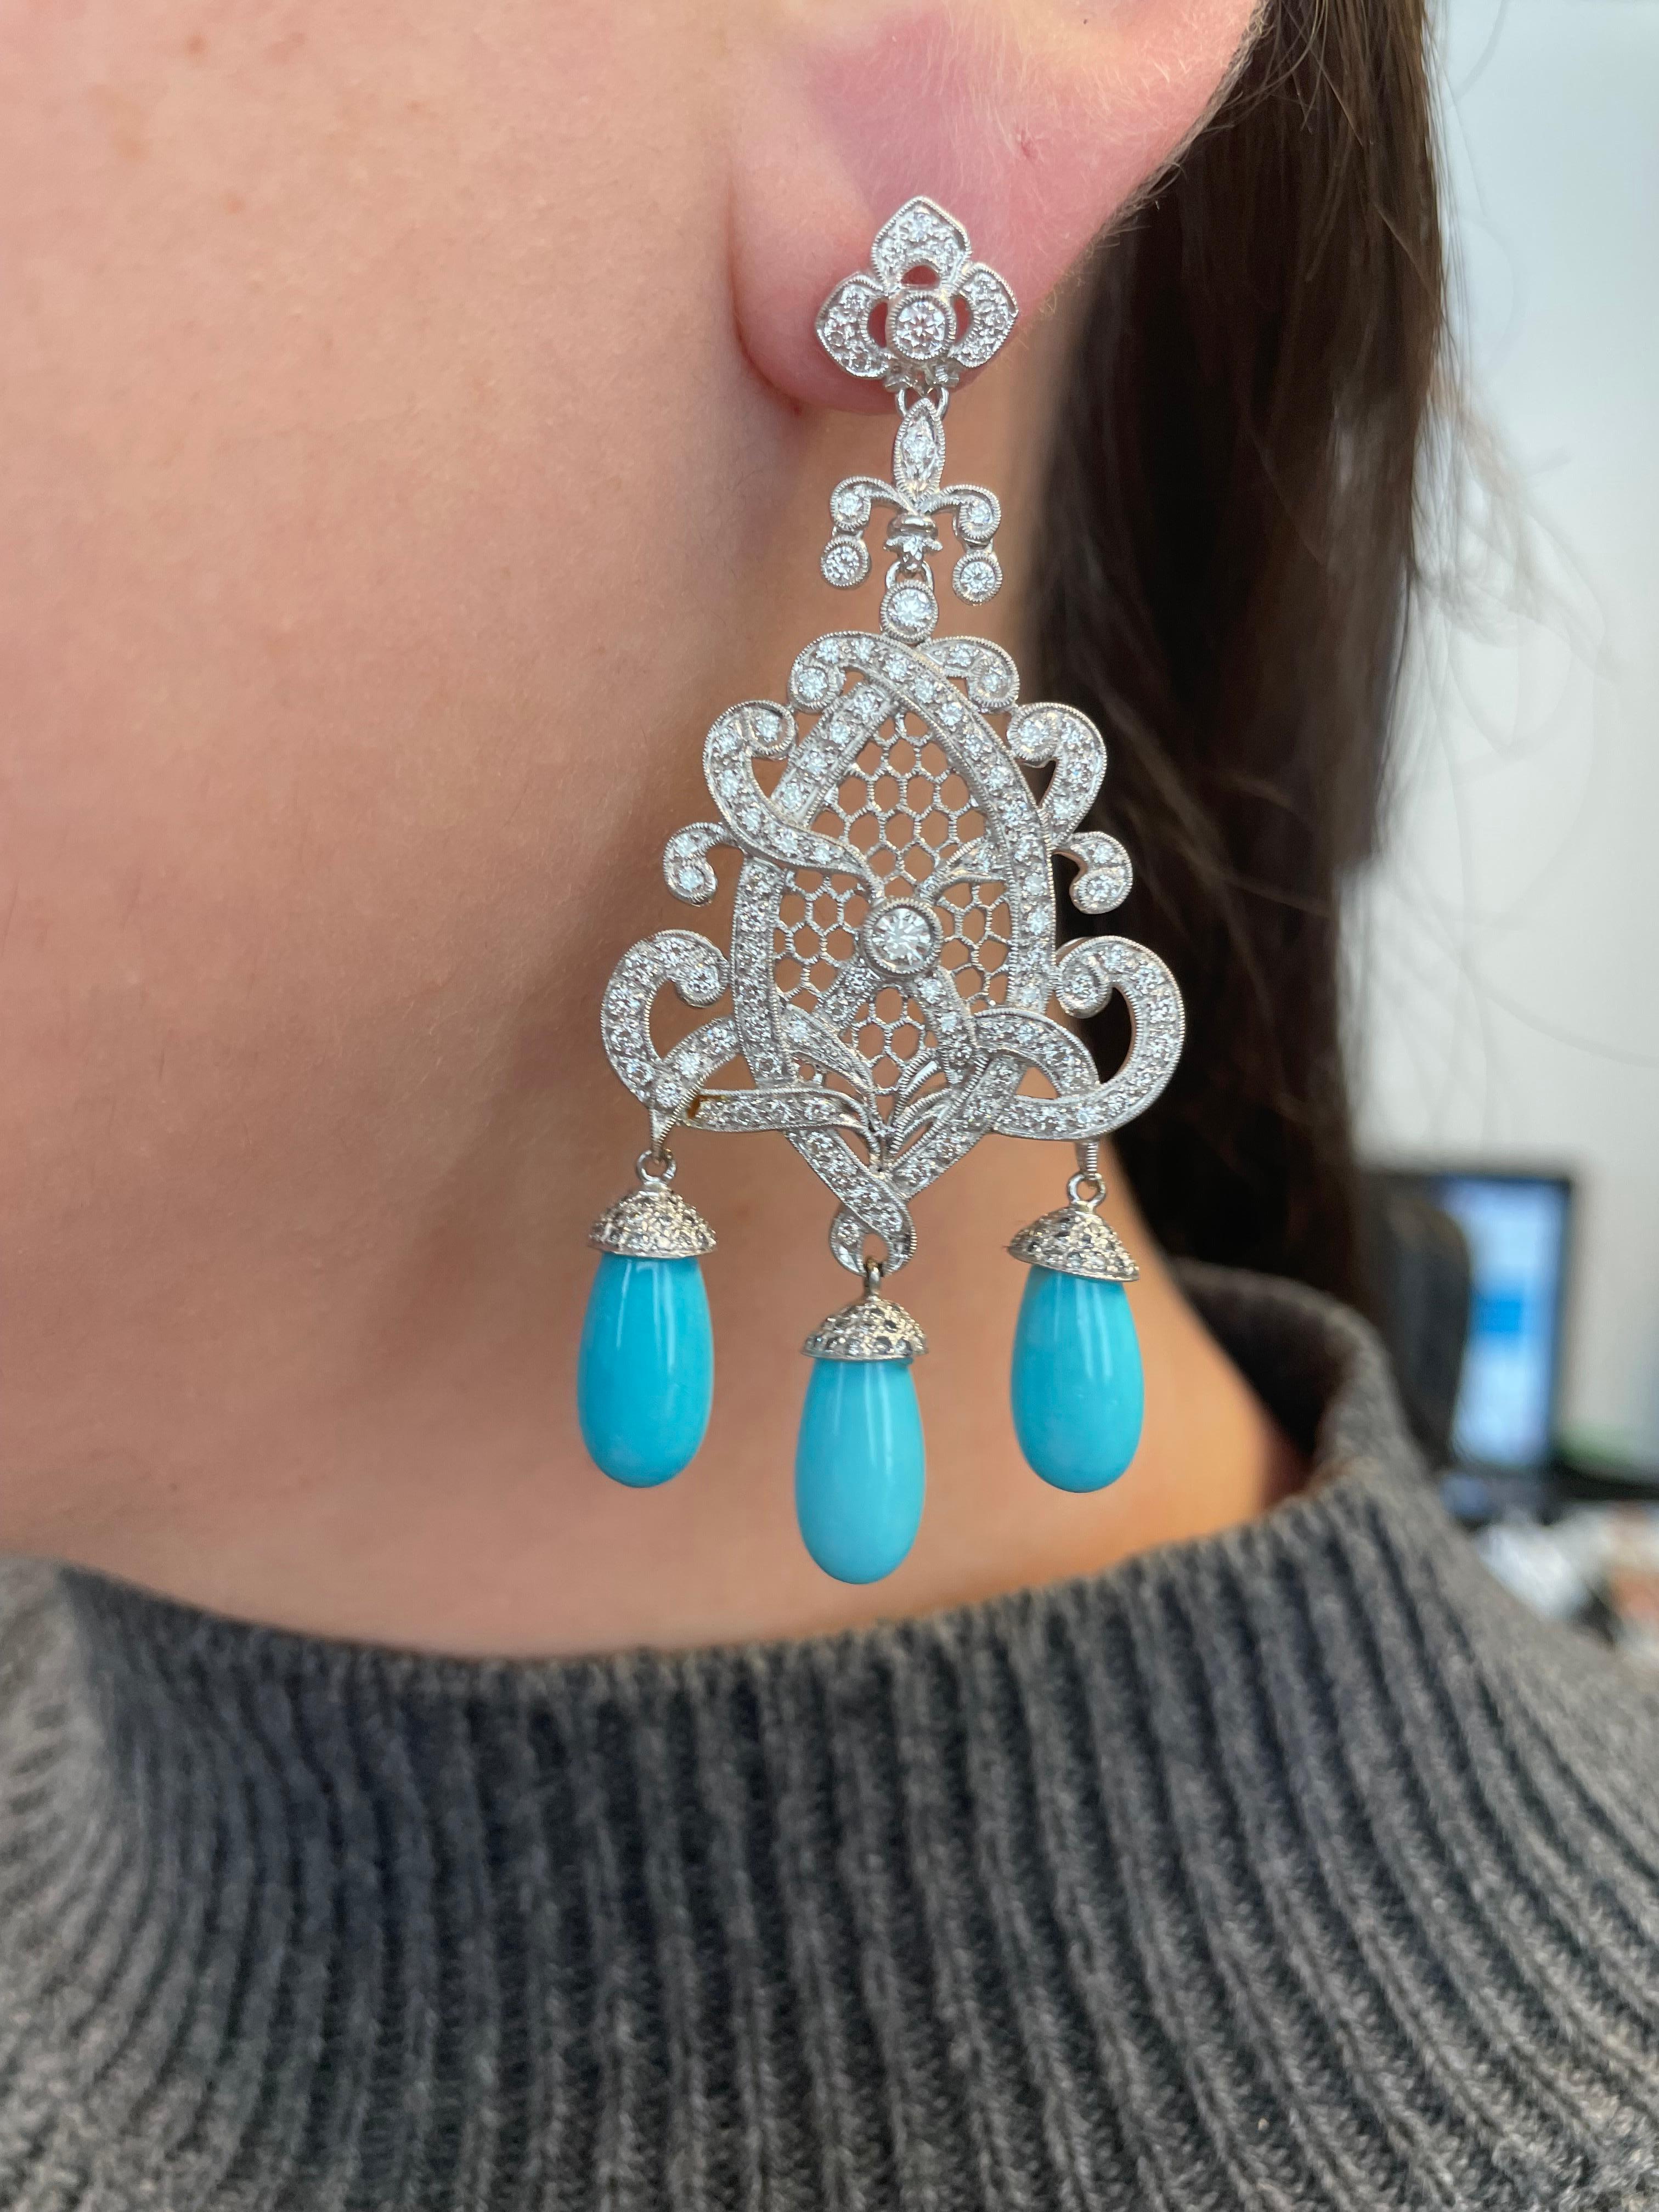 Edwardian inspired turquoise and diamond earrings.
4.45 carats of round cut diamonds, approximately H/I color and SI clarity. Complimented with 6 turquoise, 18-karat white gold.
Accommodated with an up to date appraisal by a GIA G.G. upon request.